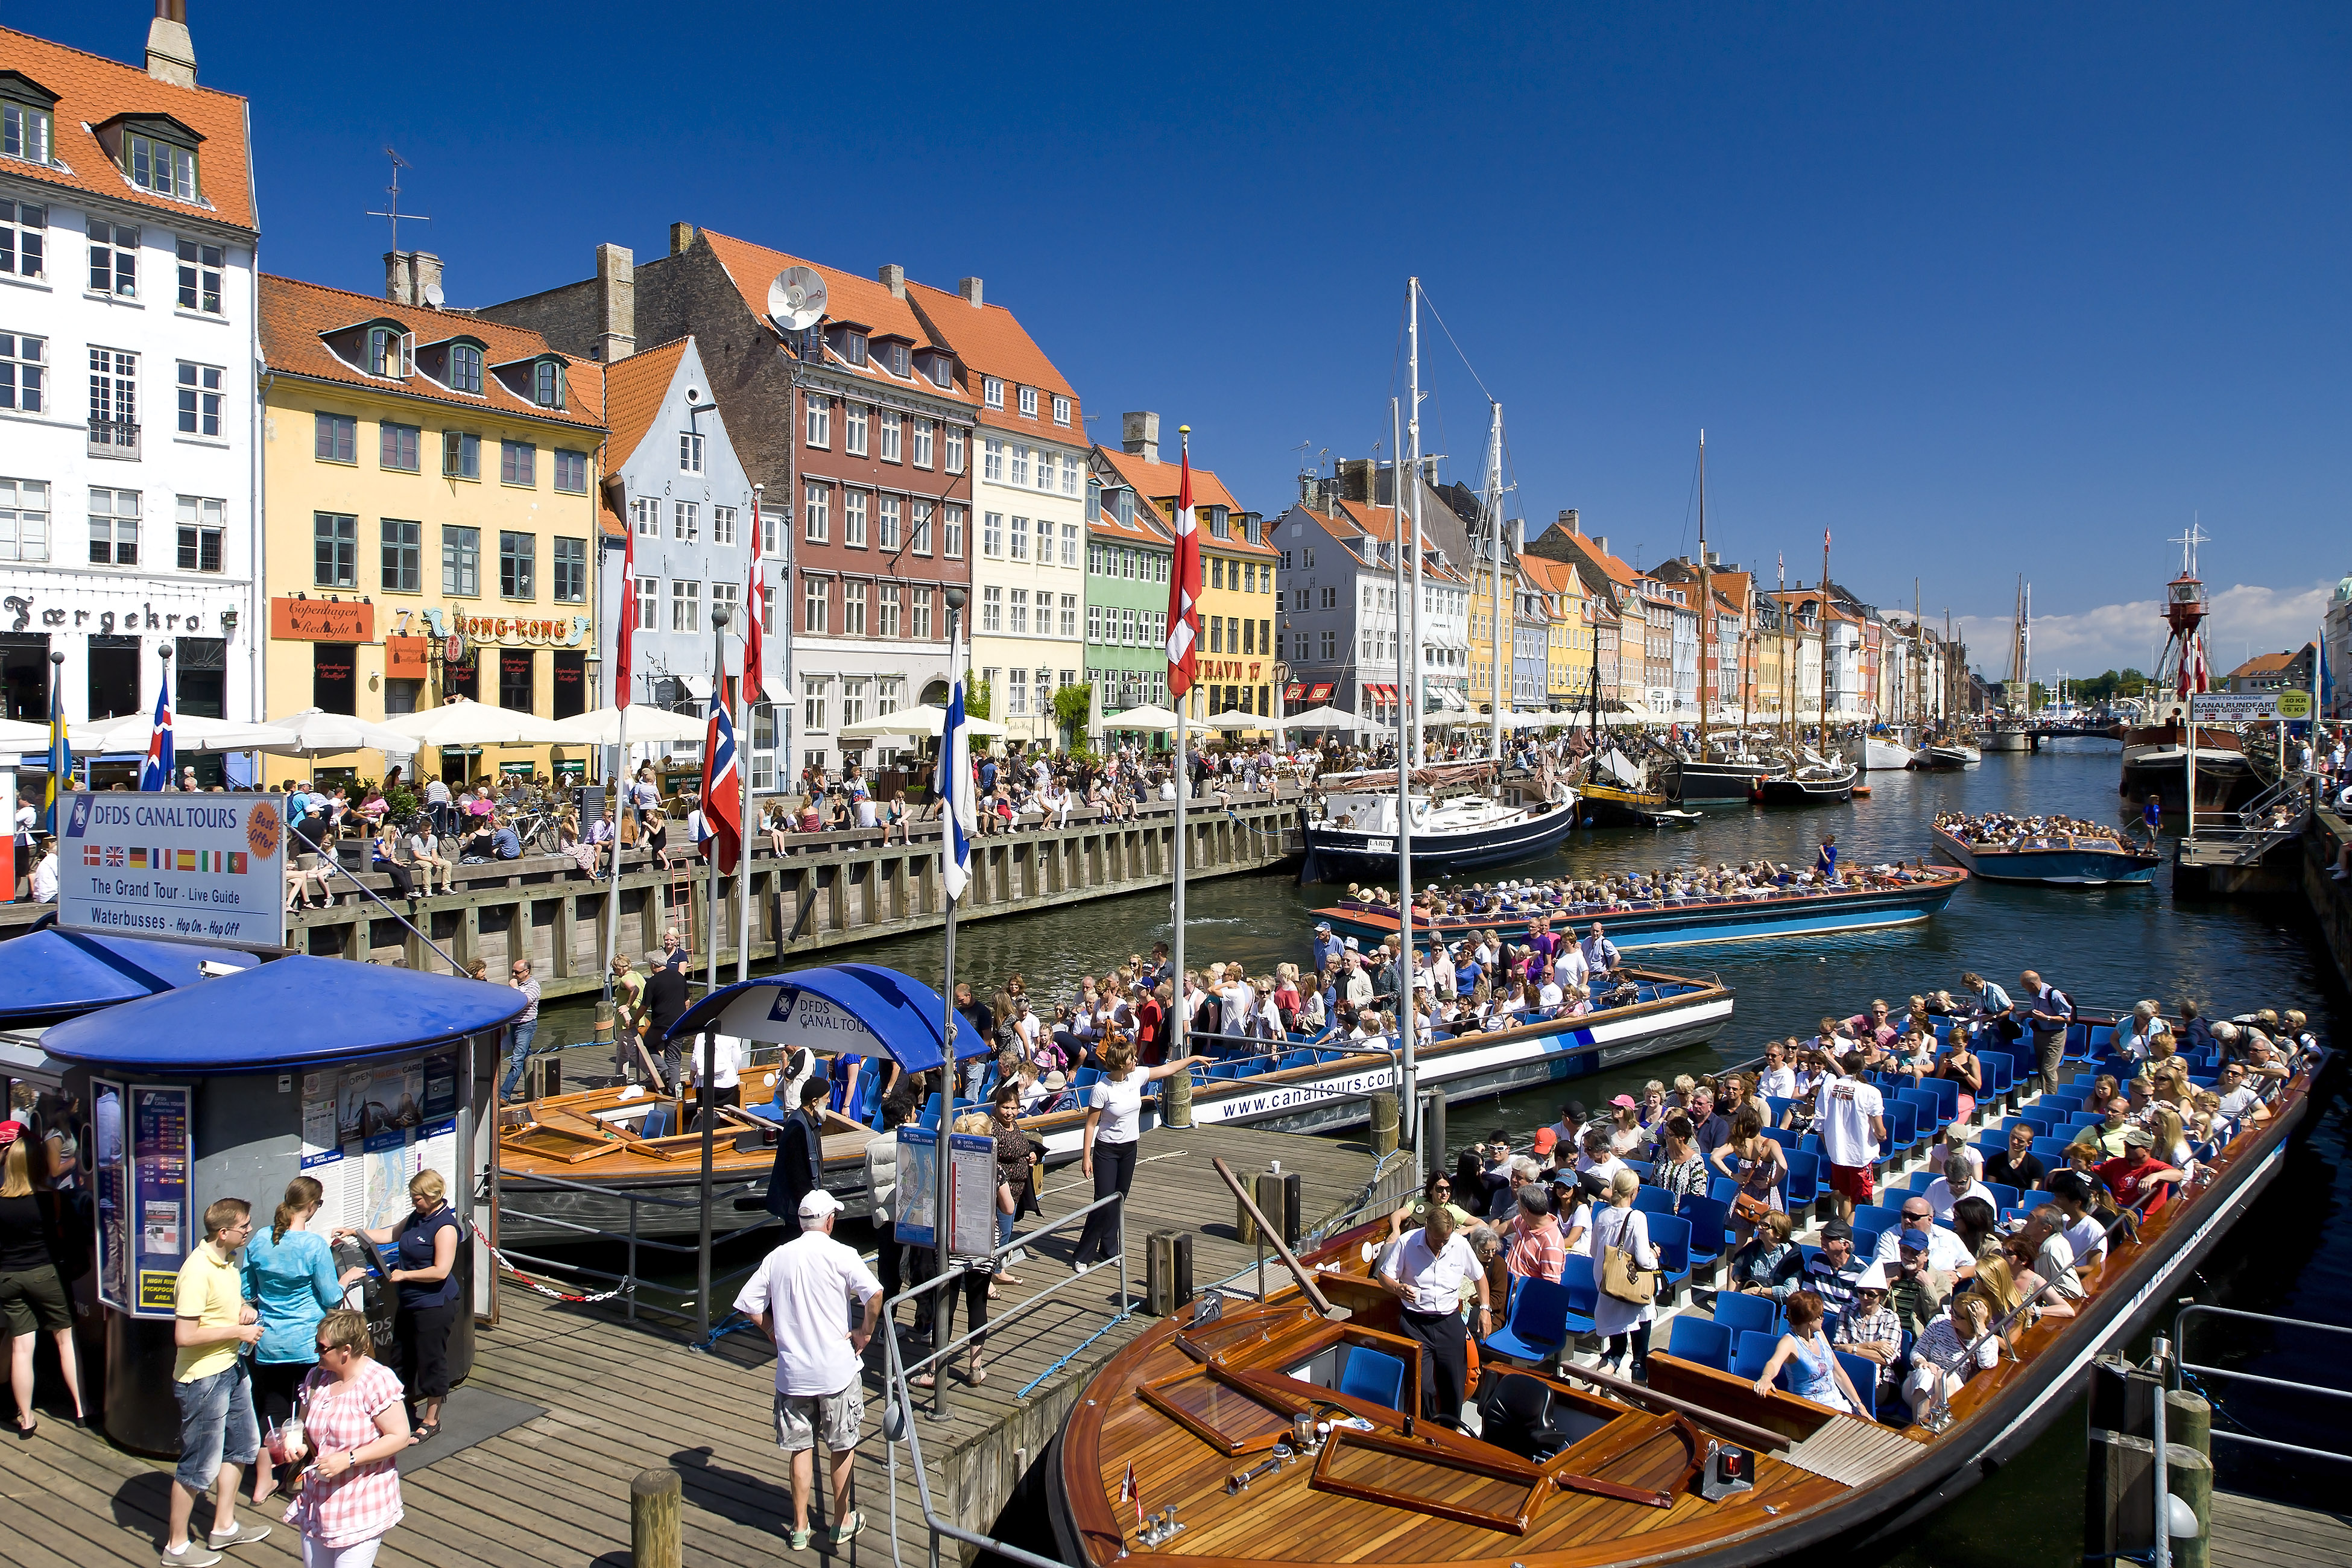 Tourboats in Nyhavn Canal on in Copenhagen on May 7, 2011. (MyLoupe/Universal Image Group/Getty Images)